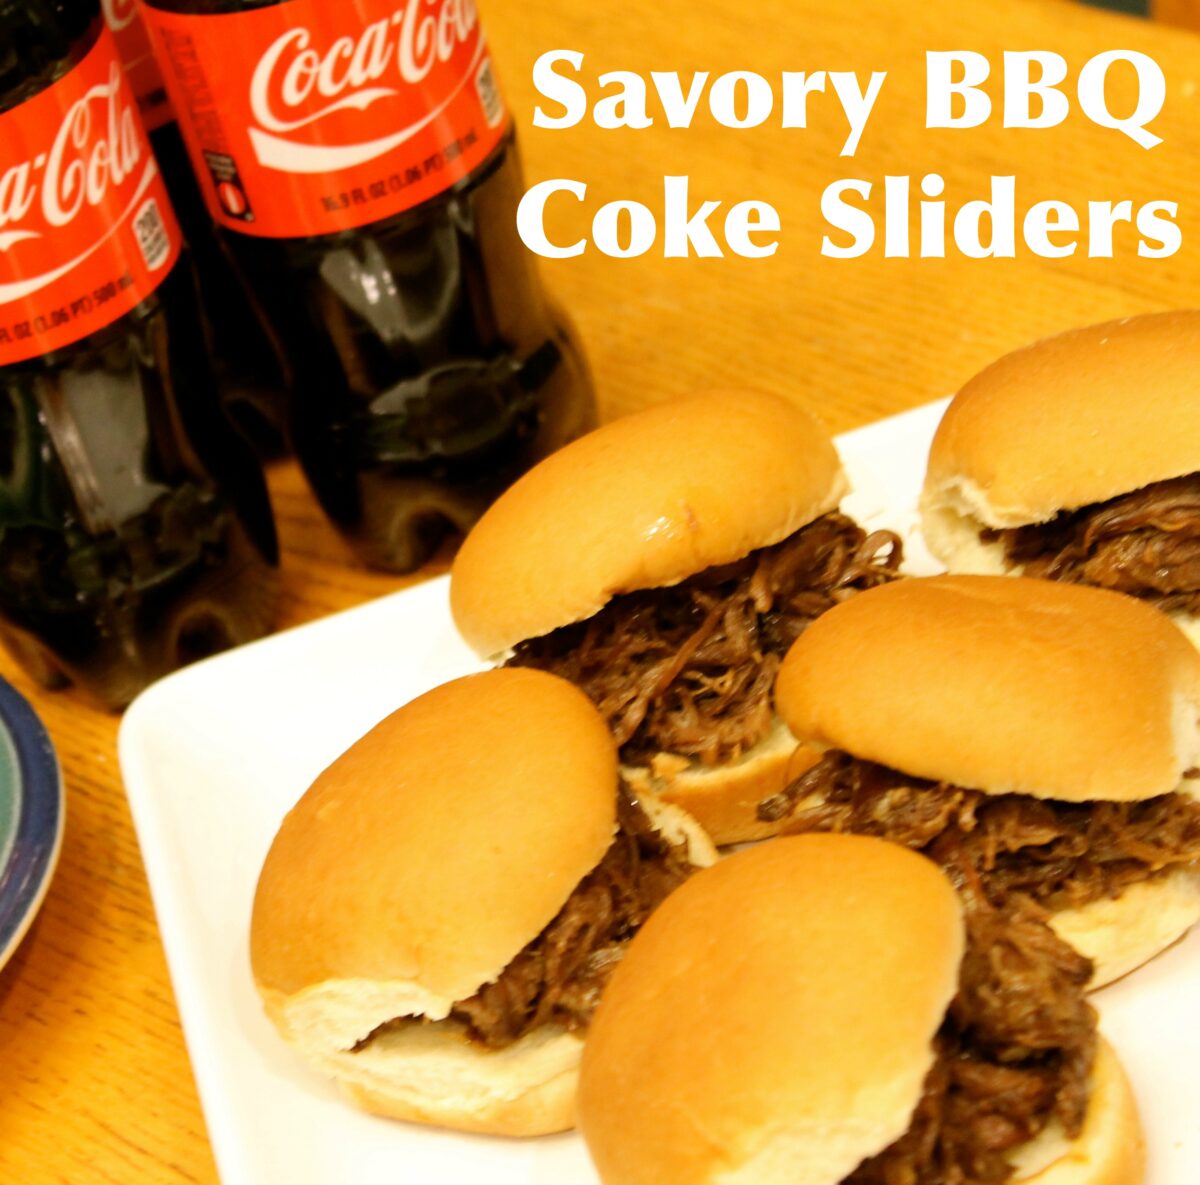 Savory BBQ Coke Sliders and Ritz Peanut Butter Chocolate Snackers